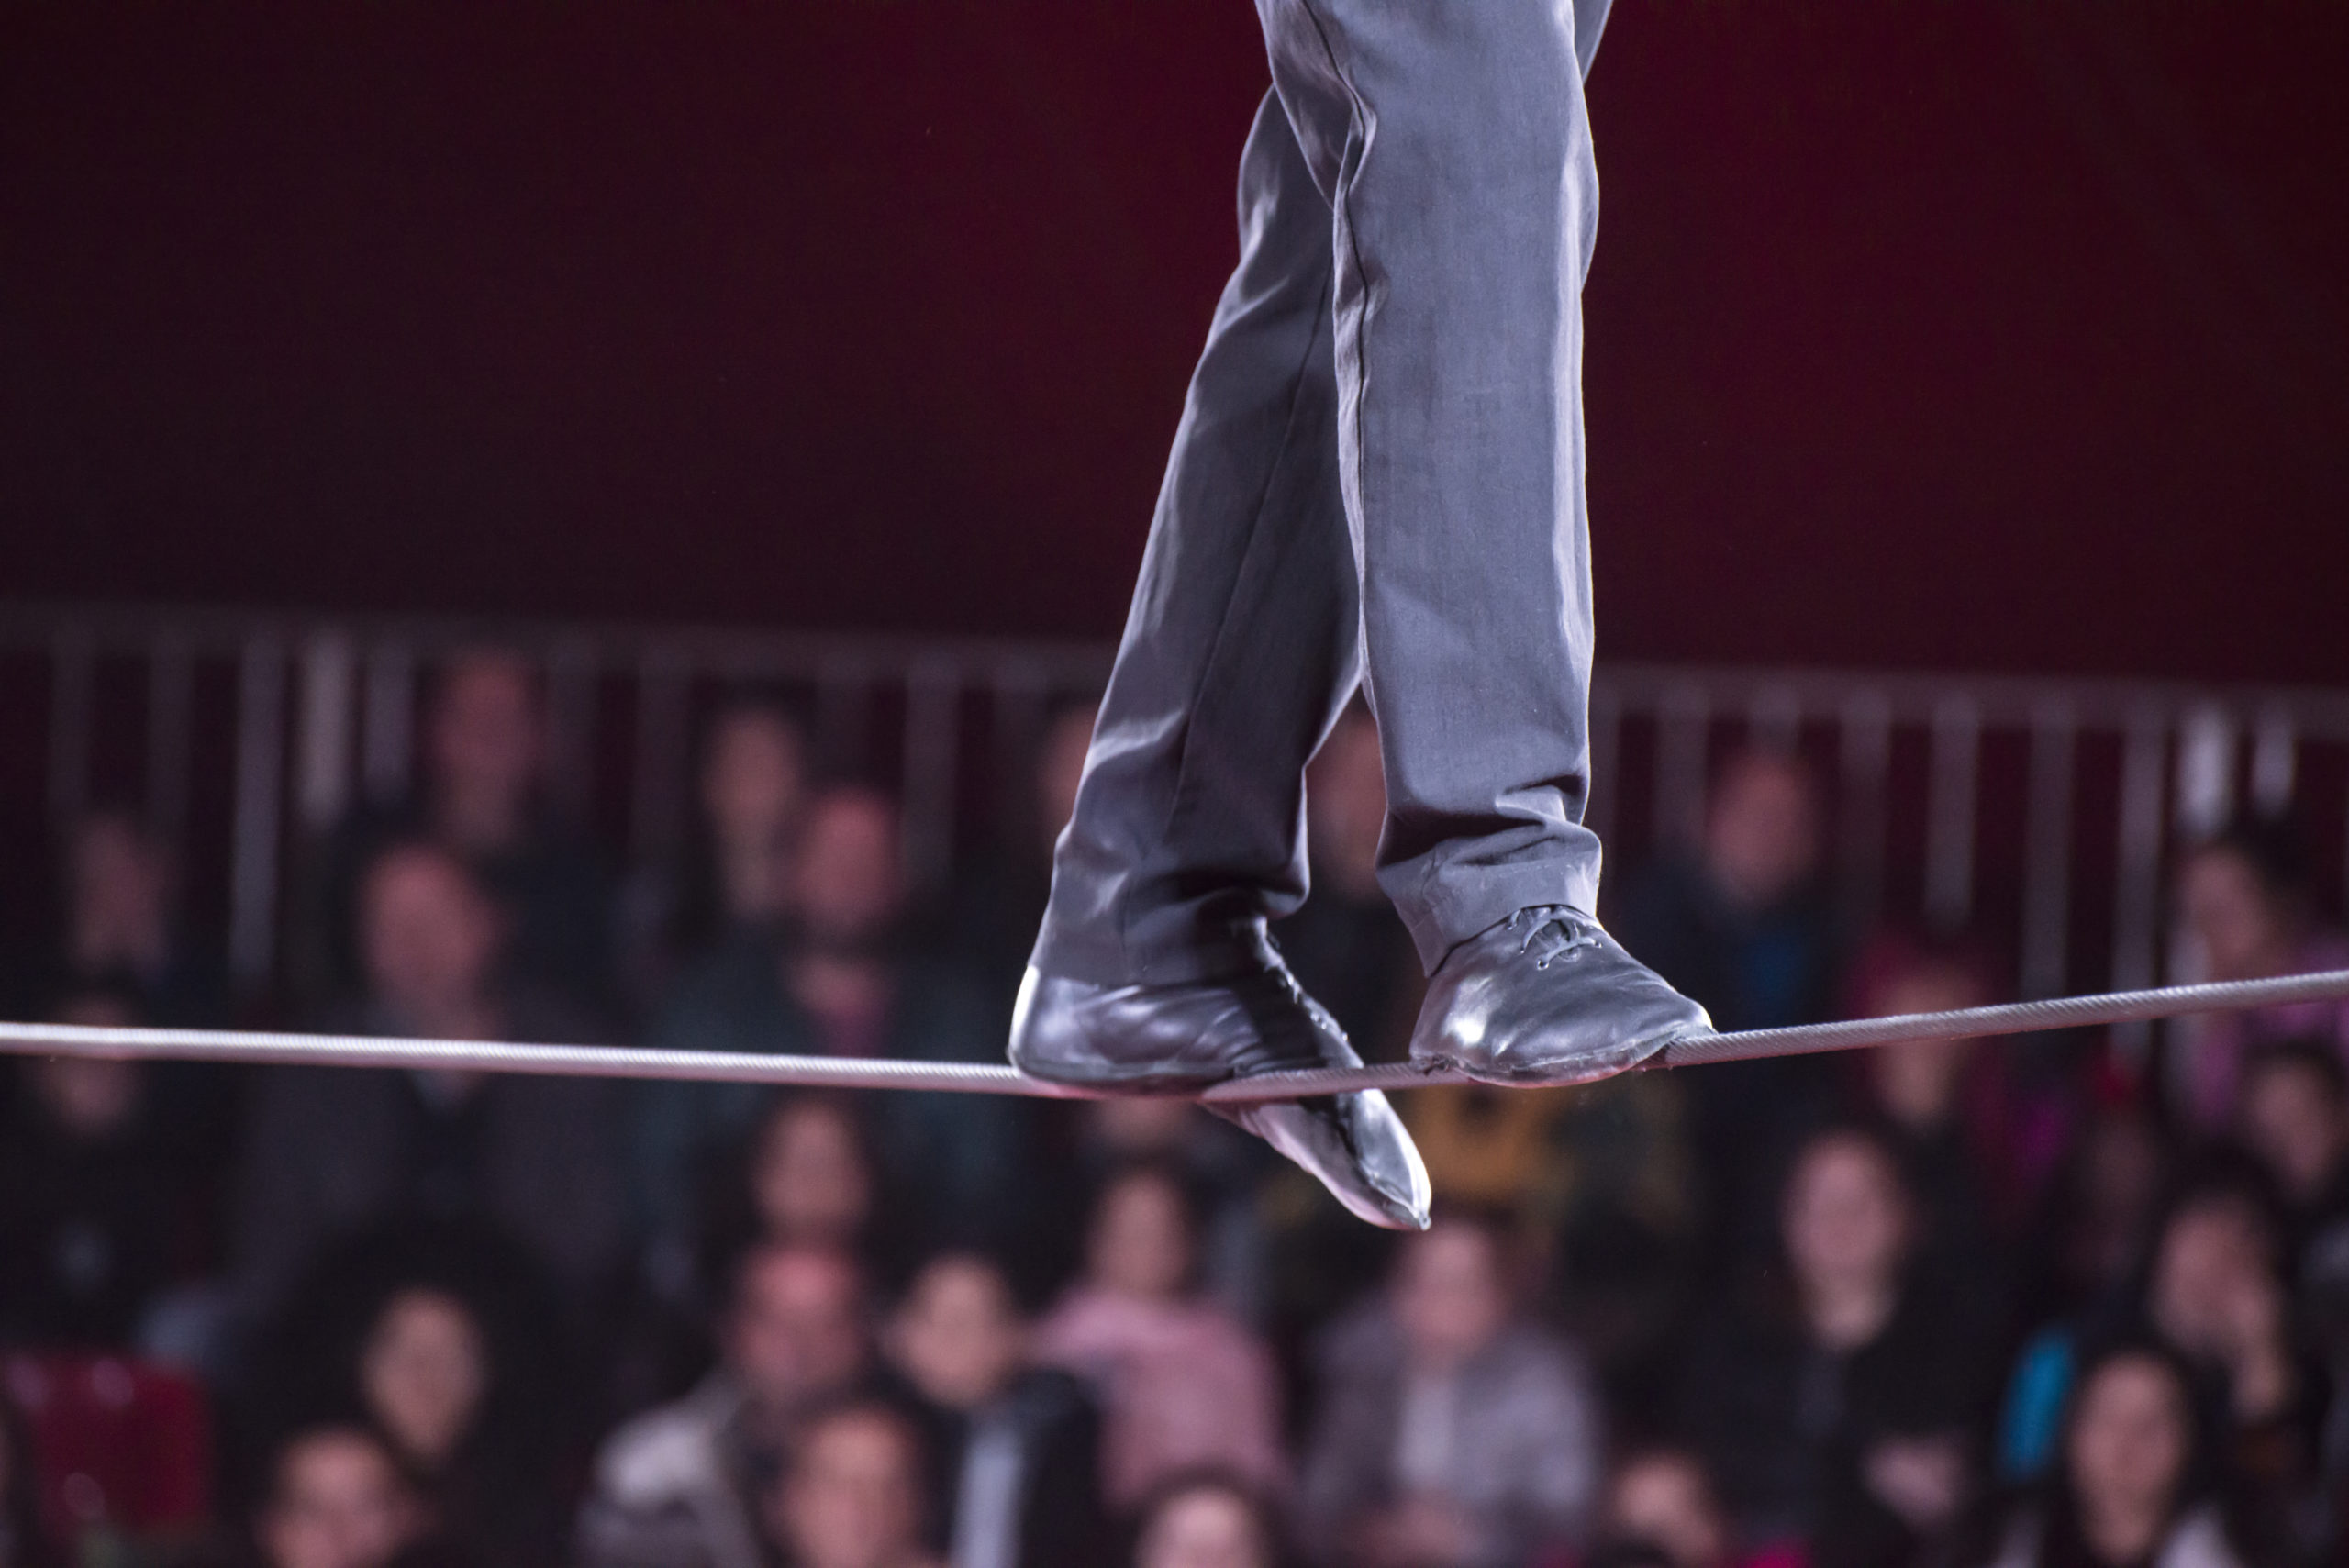 A man walks on a tight wire in circus.